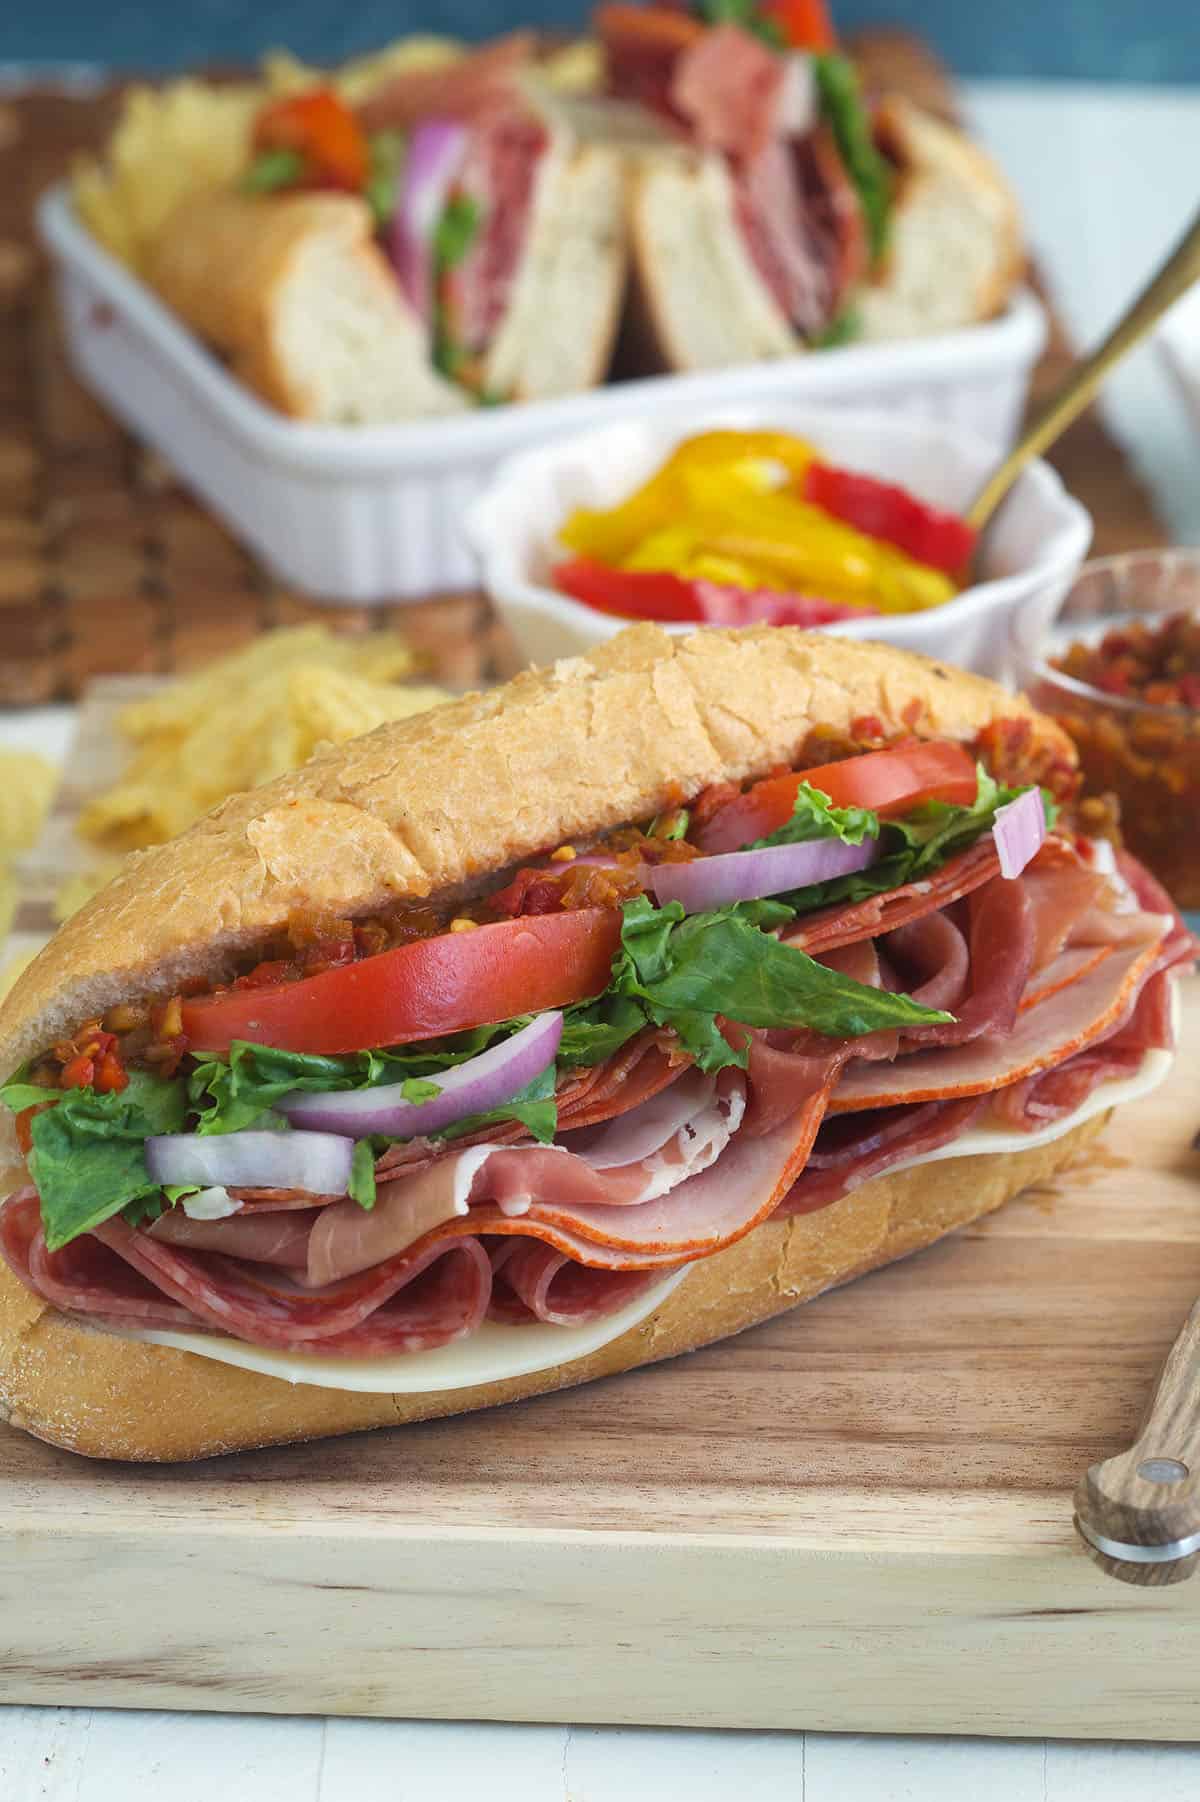 An Italian hoagie is placed on a wooden cutting board. 